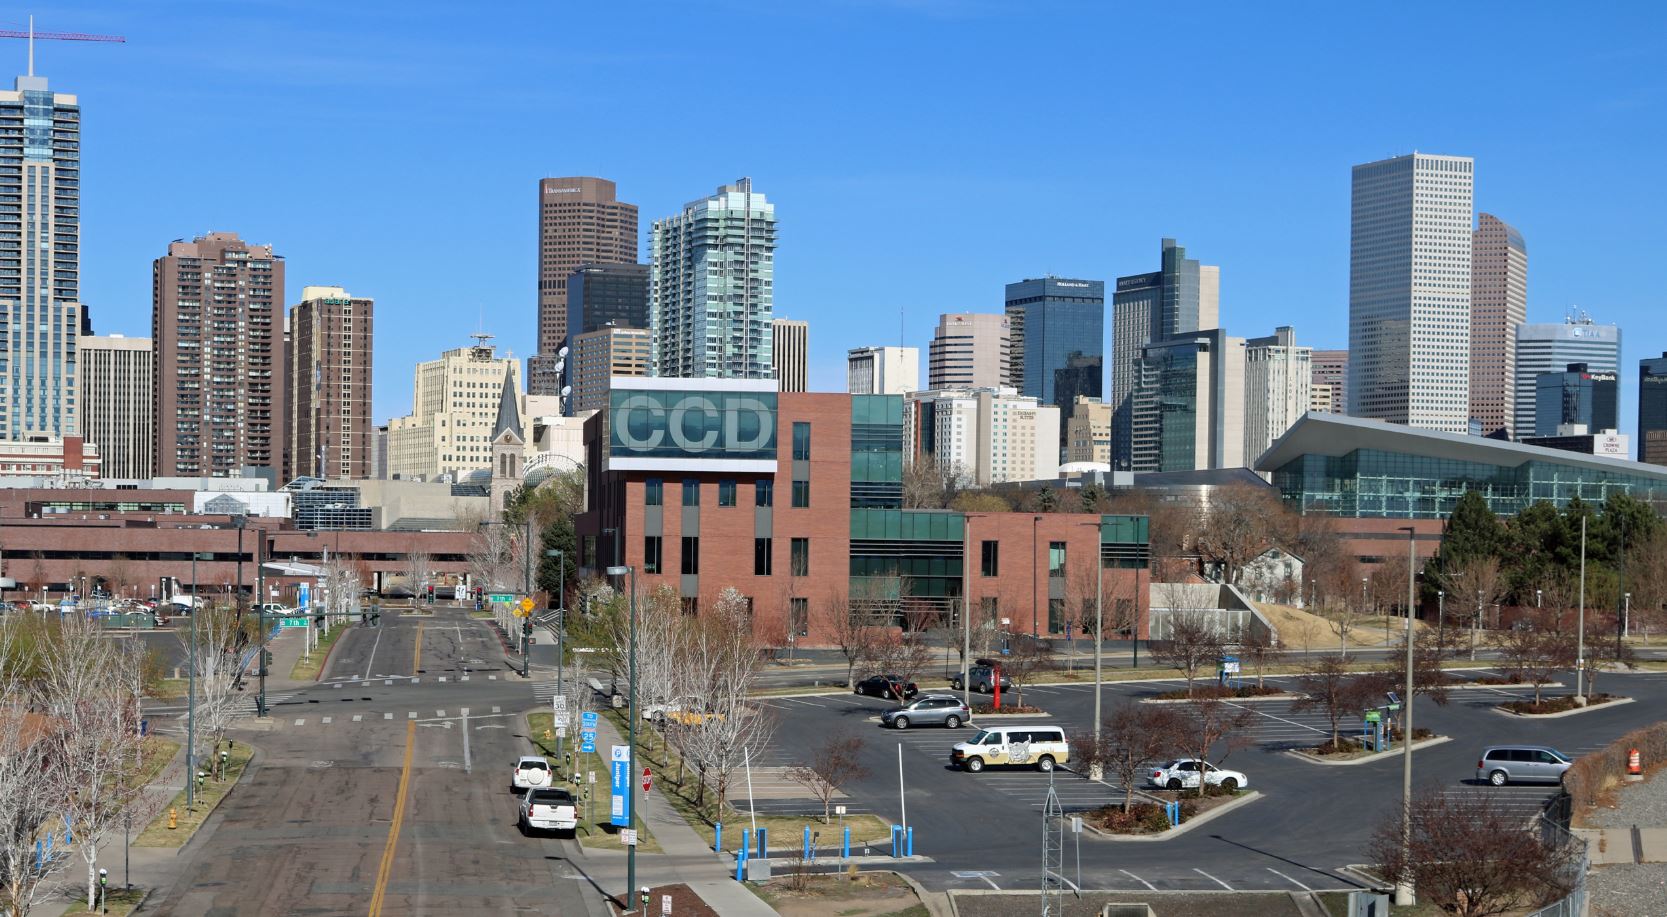 An image of the downtown Denver skyline, shot from the vantage showing buildings and streets and high-rise buildings.